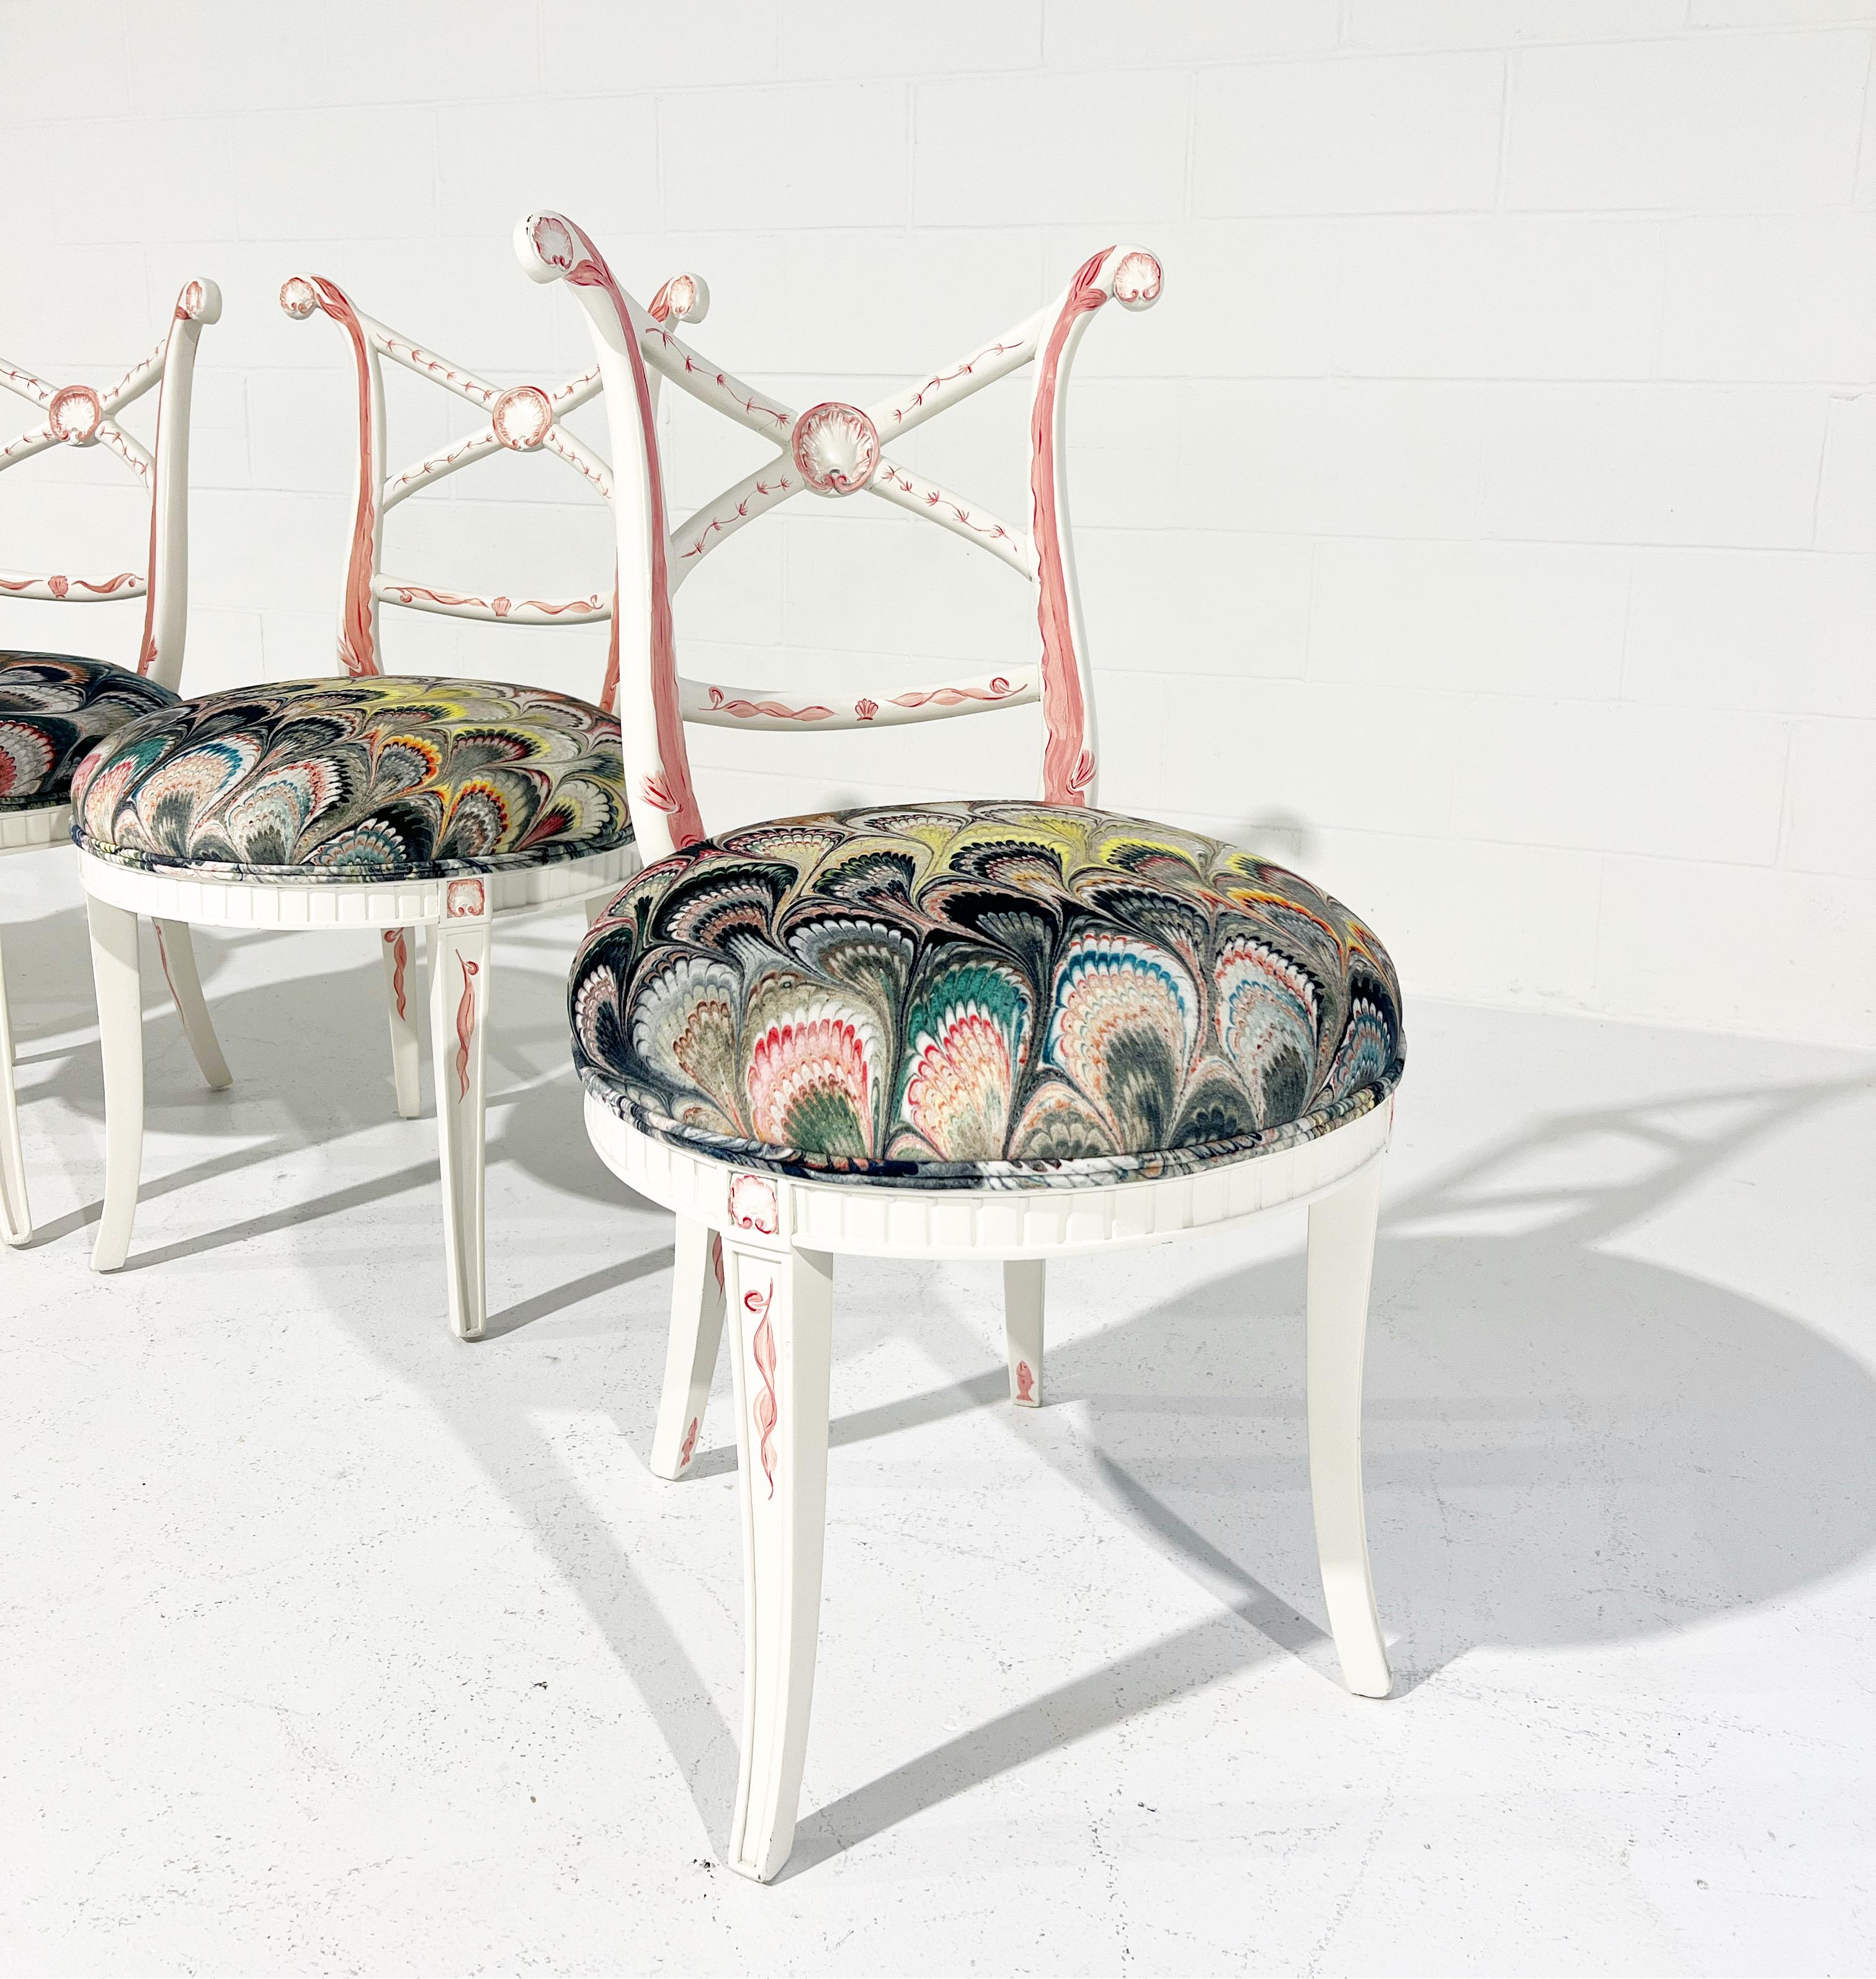 A charming set of 4 chairs in the Hollywood Regency style. Each chair was first stripped and painted a beautiful ivory color, the perfect backdrop for artist Maggie Robertson. Inspired by the chair's design and details, Maggie hand-painted imagery